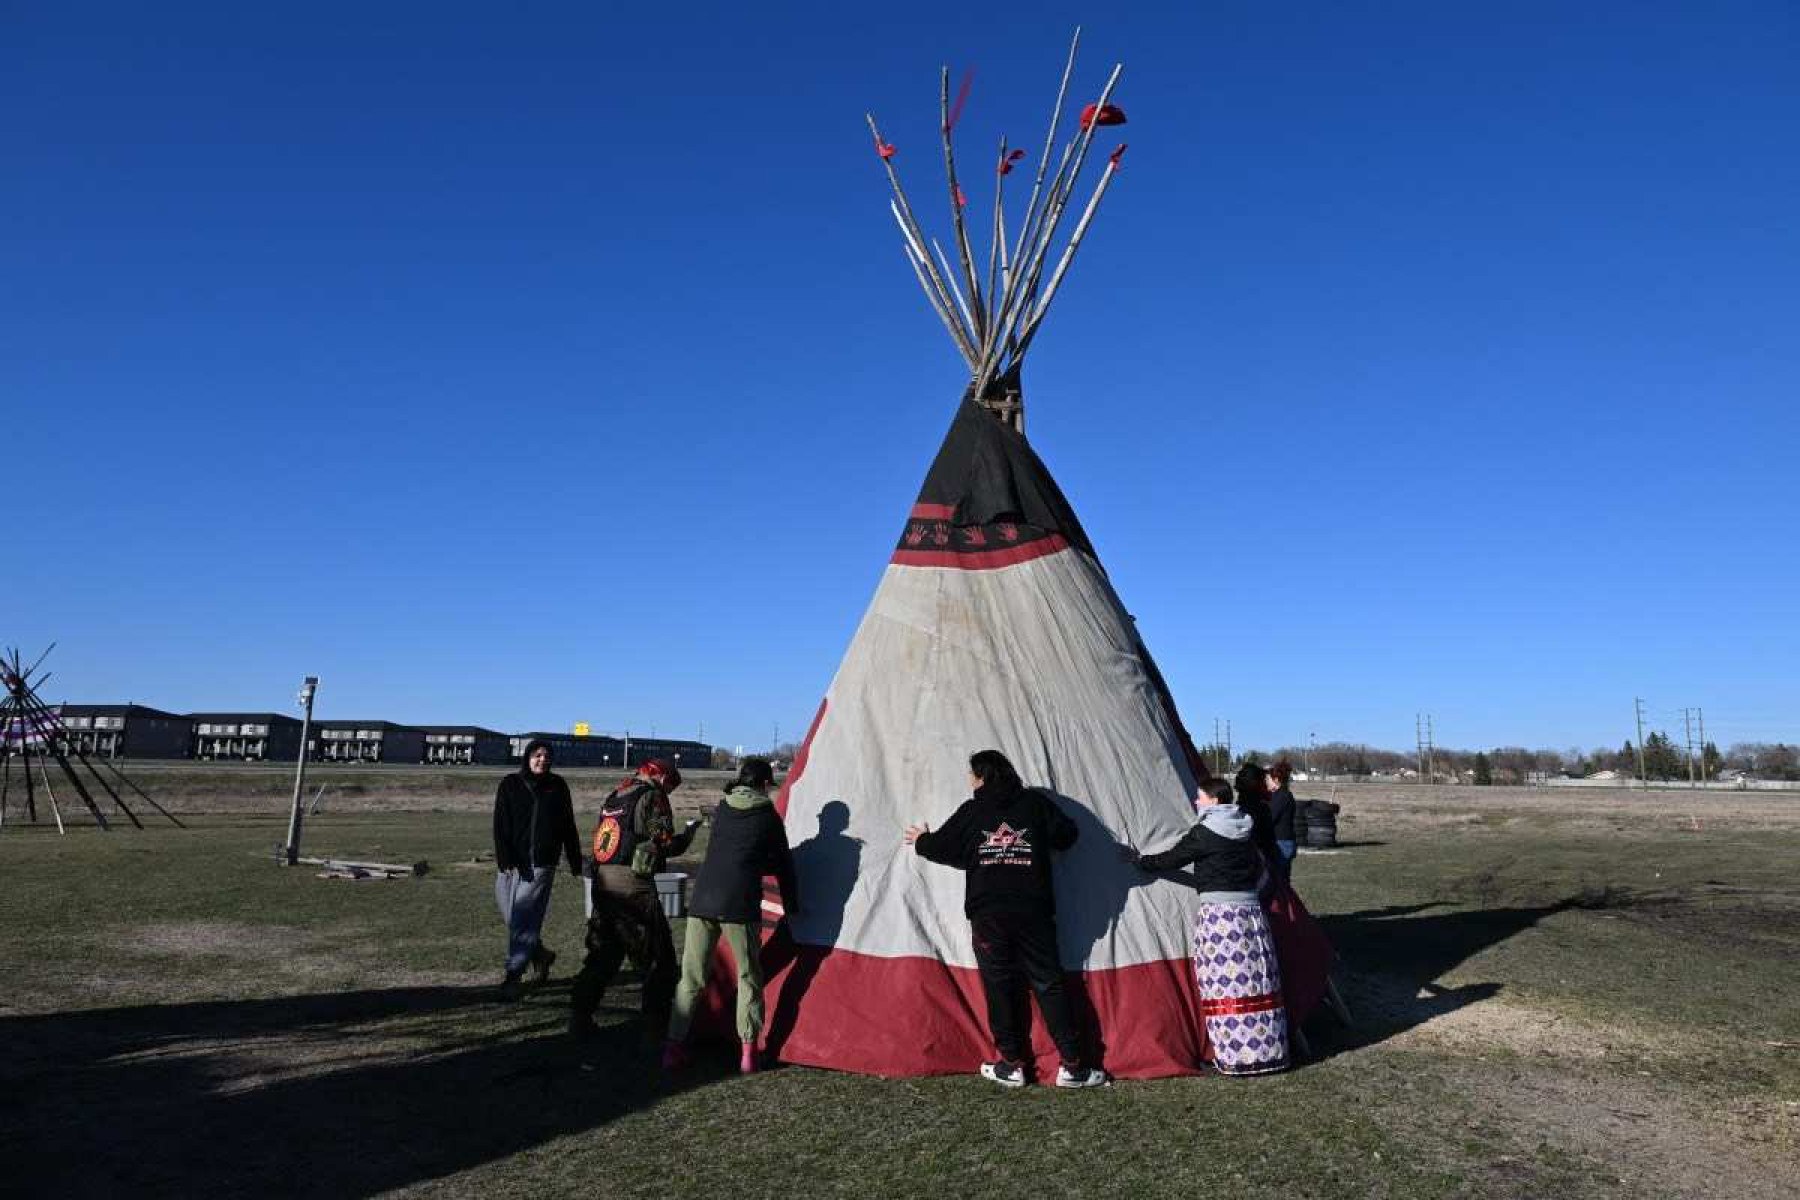  Harris family and friends prepare to set a ceremonial tepee in honor of slain Morgan Harris and other Missing and Murdered Indigenous Women, at 